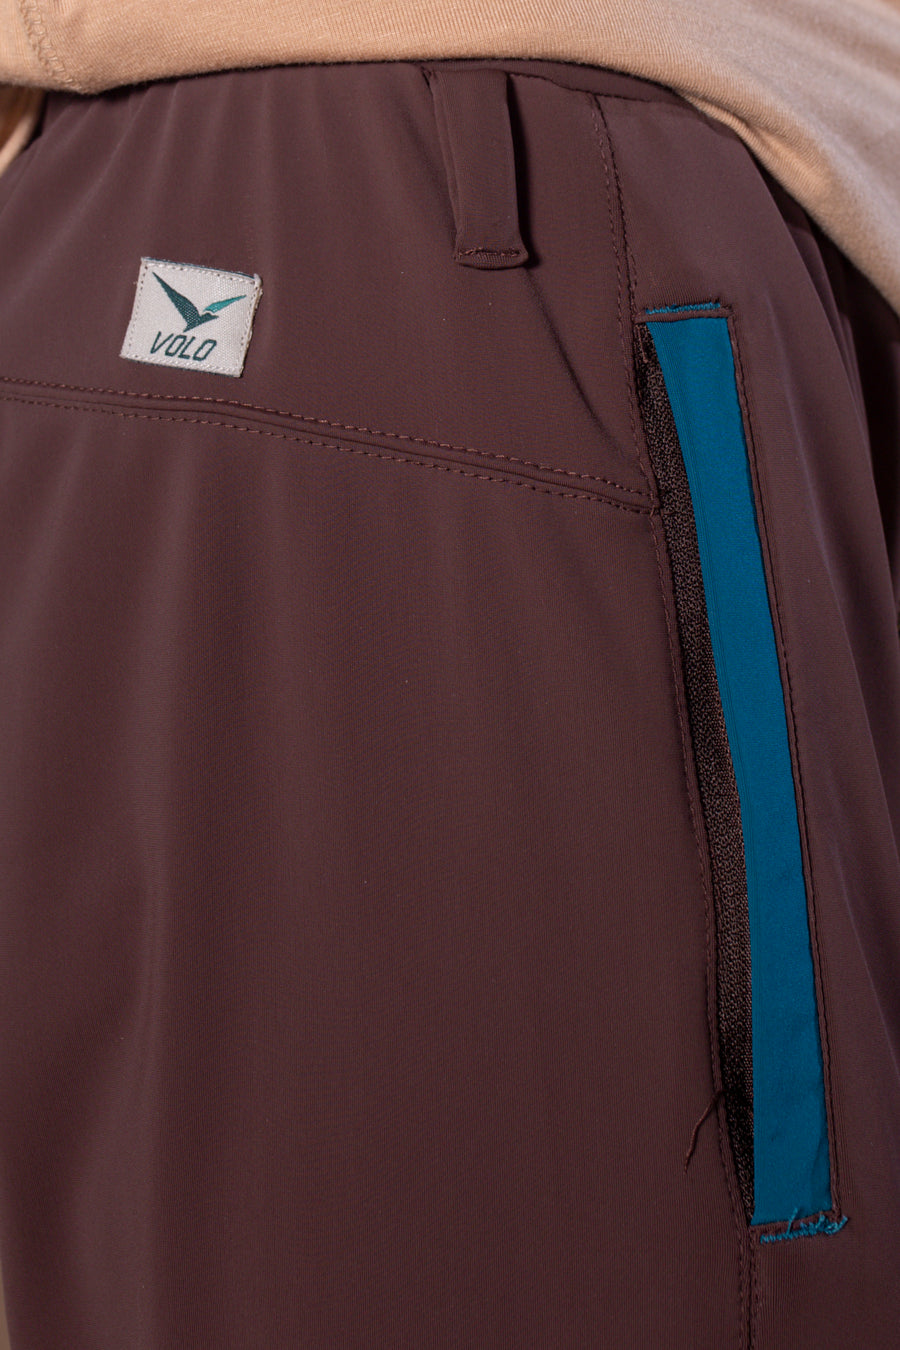 Men's Wanderlust Pant Brown | VOLO Apparel | These pants are designed to give you wanderlust, an ultralight super durable athletic pant with a five pocket design, a 3 point gusset for all your movements and a high ankle tapered bottom. The revolutional Italian nylon is patented with UPF 50 protection and extreme breathability. The one pant to go everywhere and do everything!